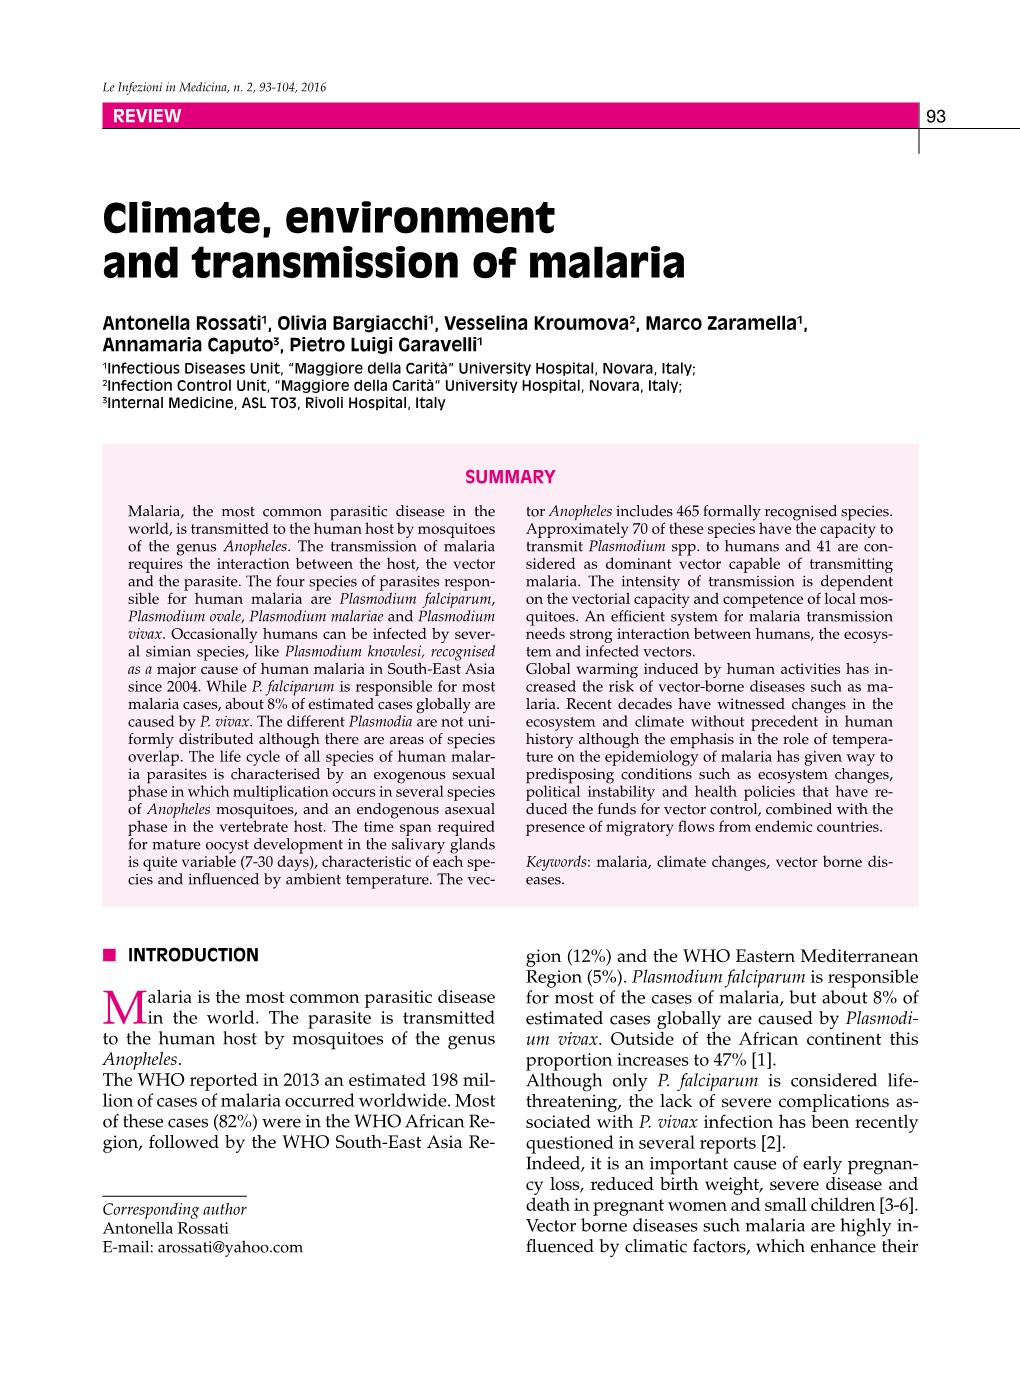 Climate, Environment and Transmission of Malaria